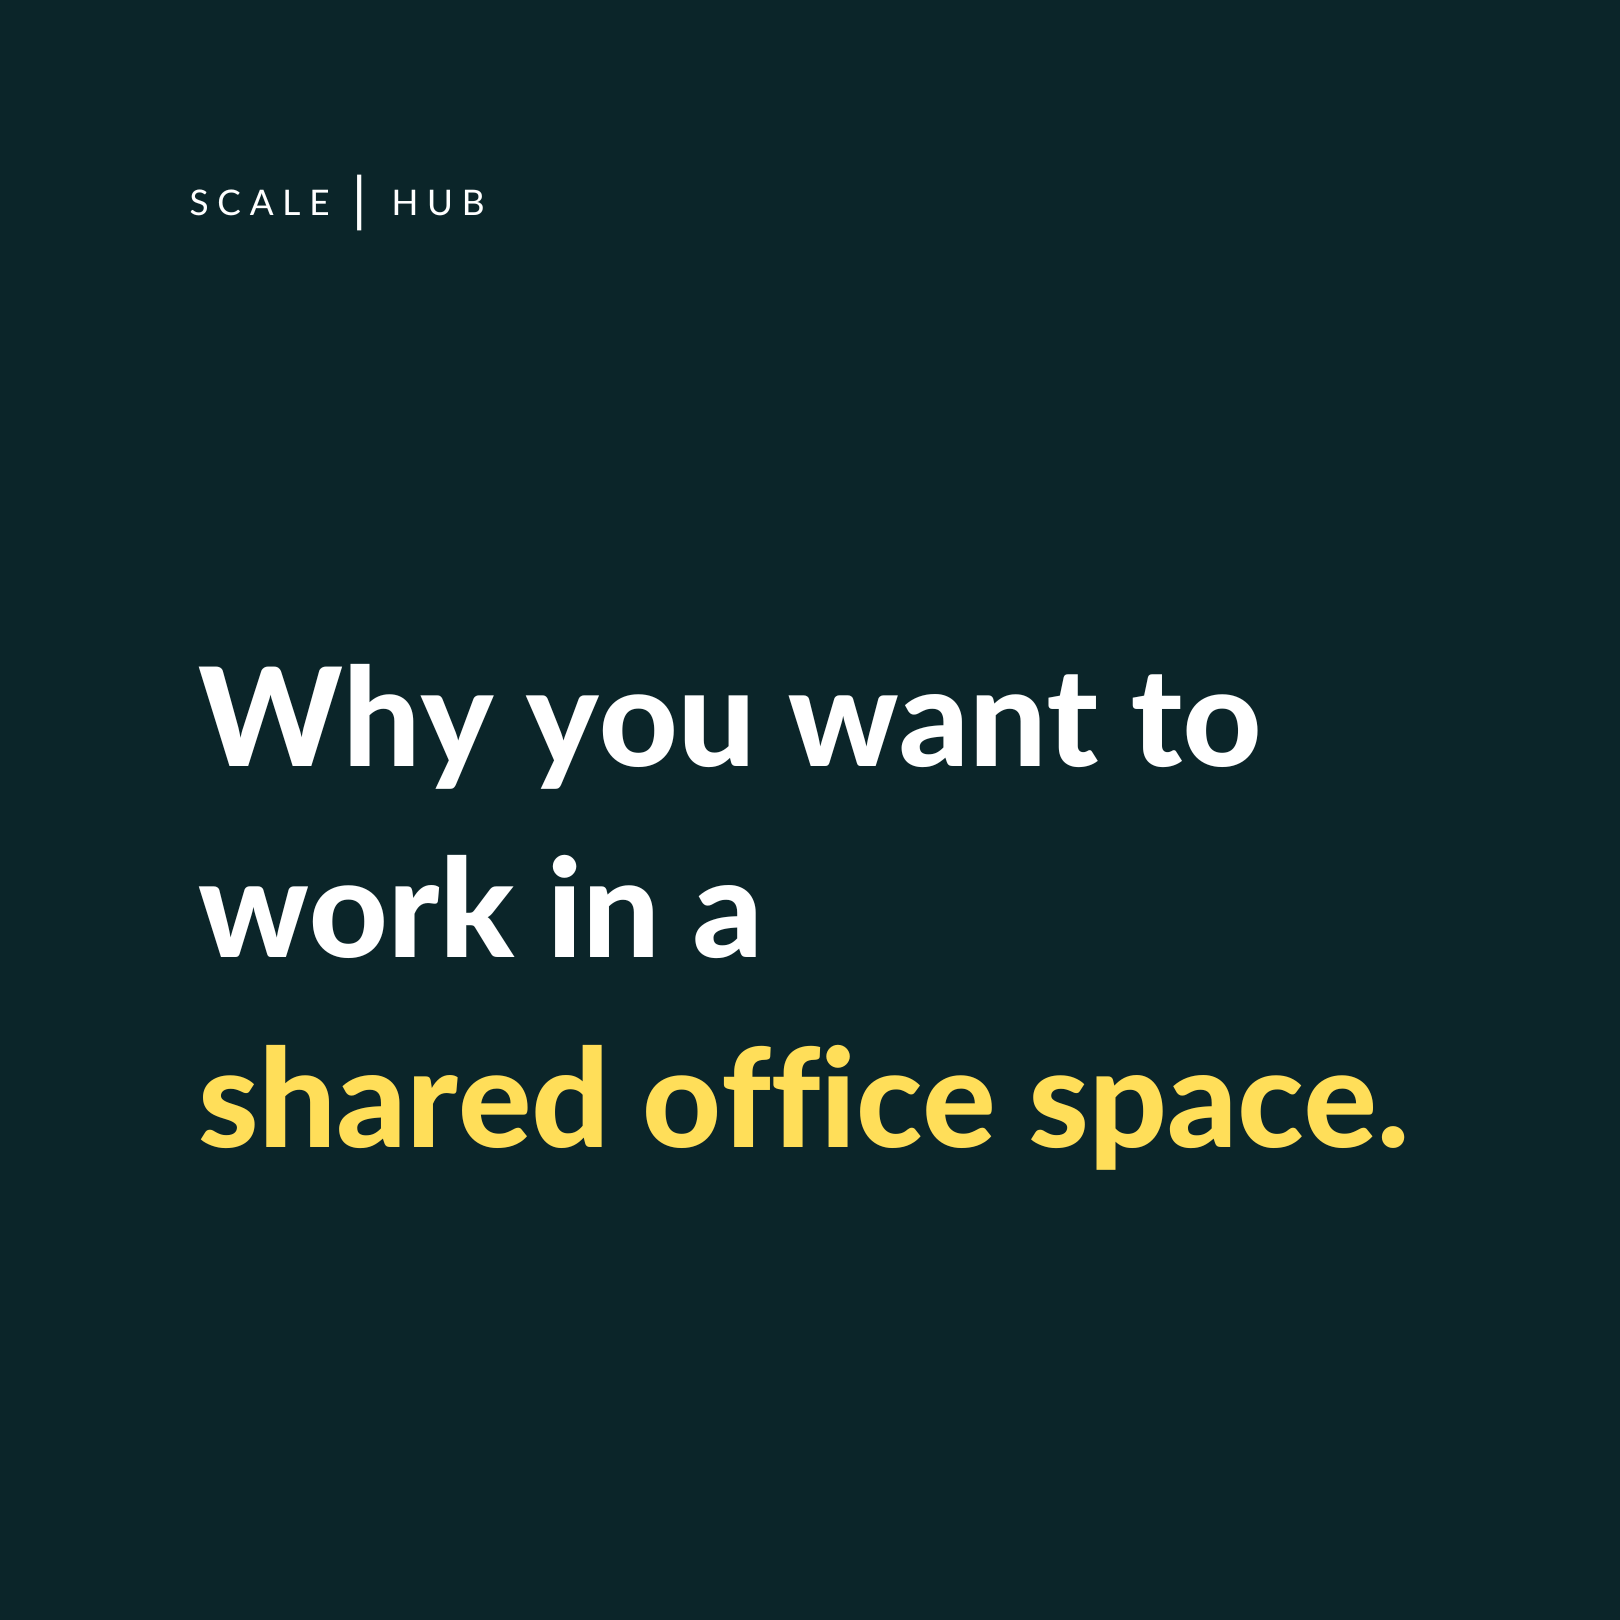 Why you want to work in a shared office space.